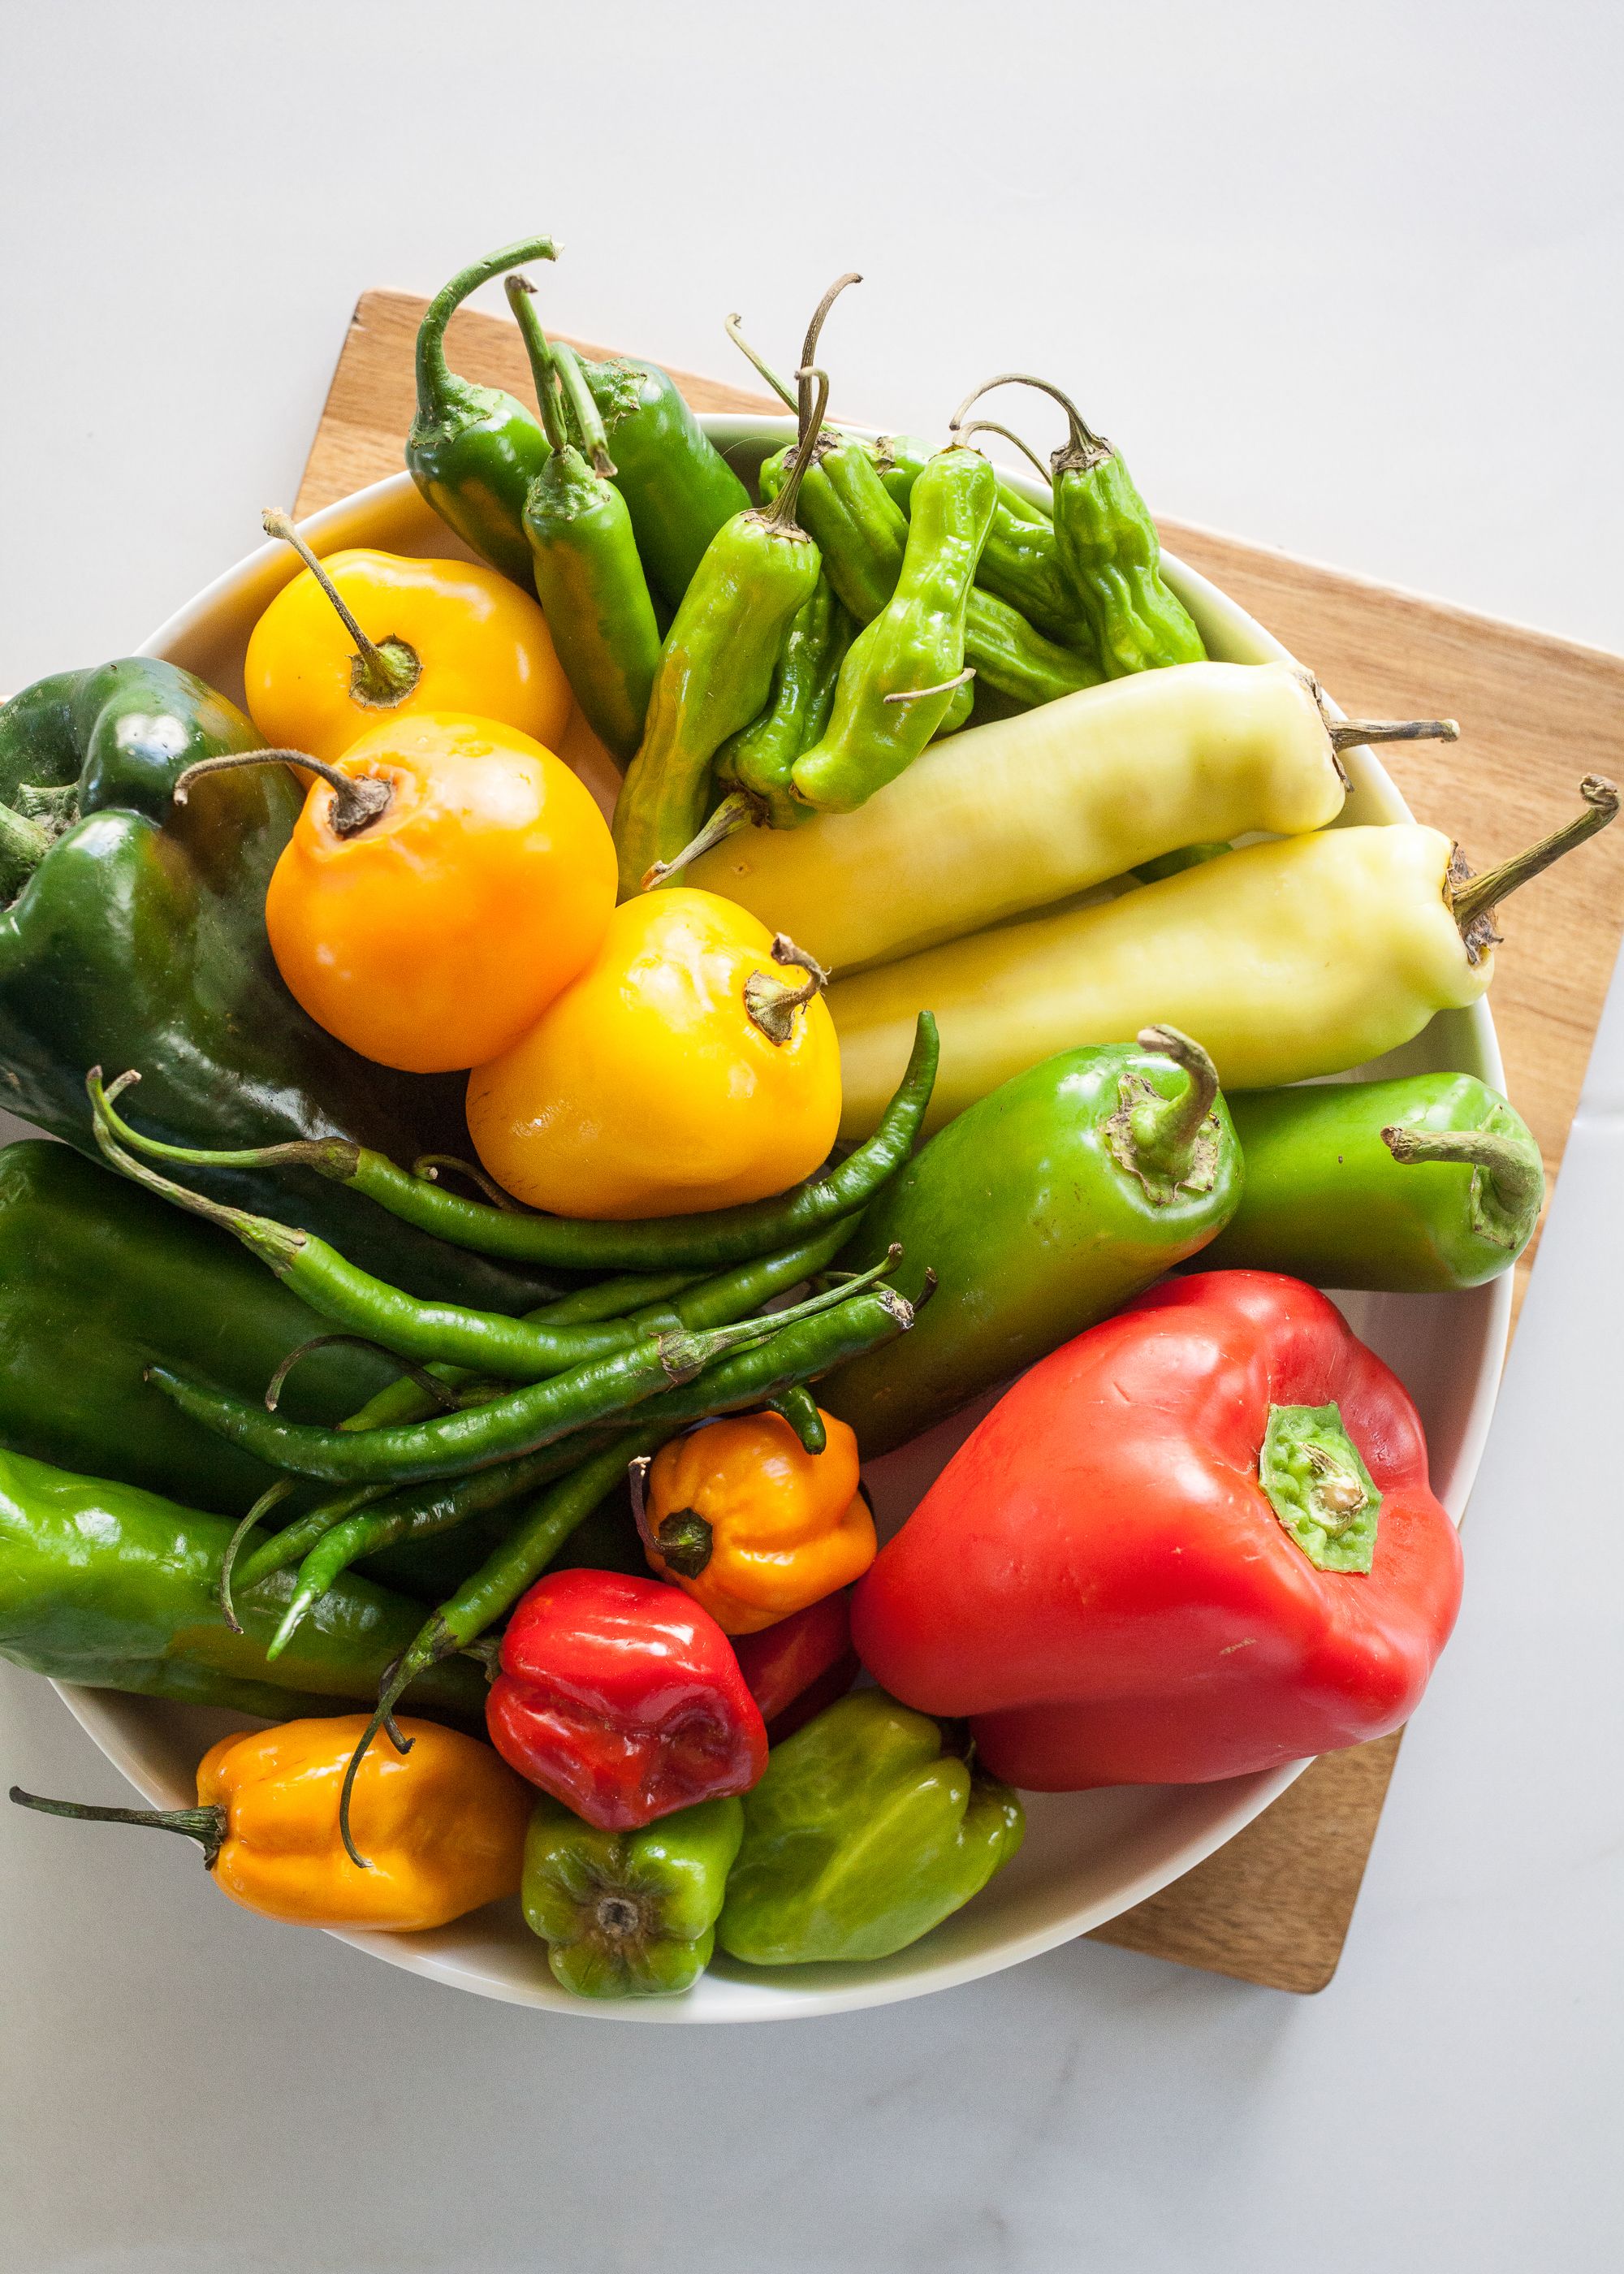 7 Ways To Enjoy Green Peppers